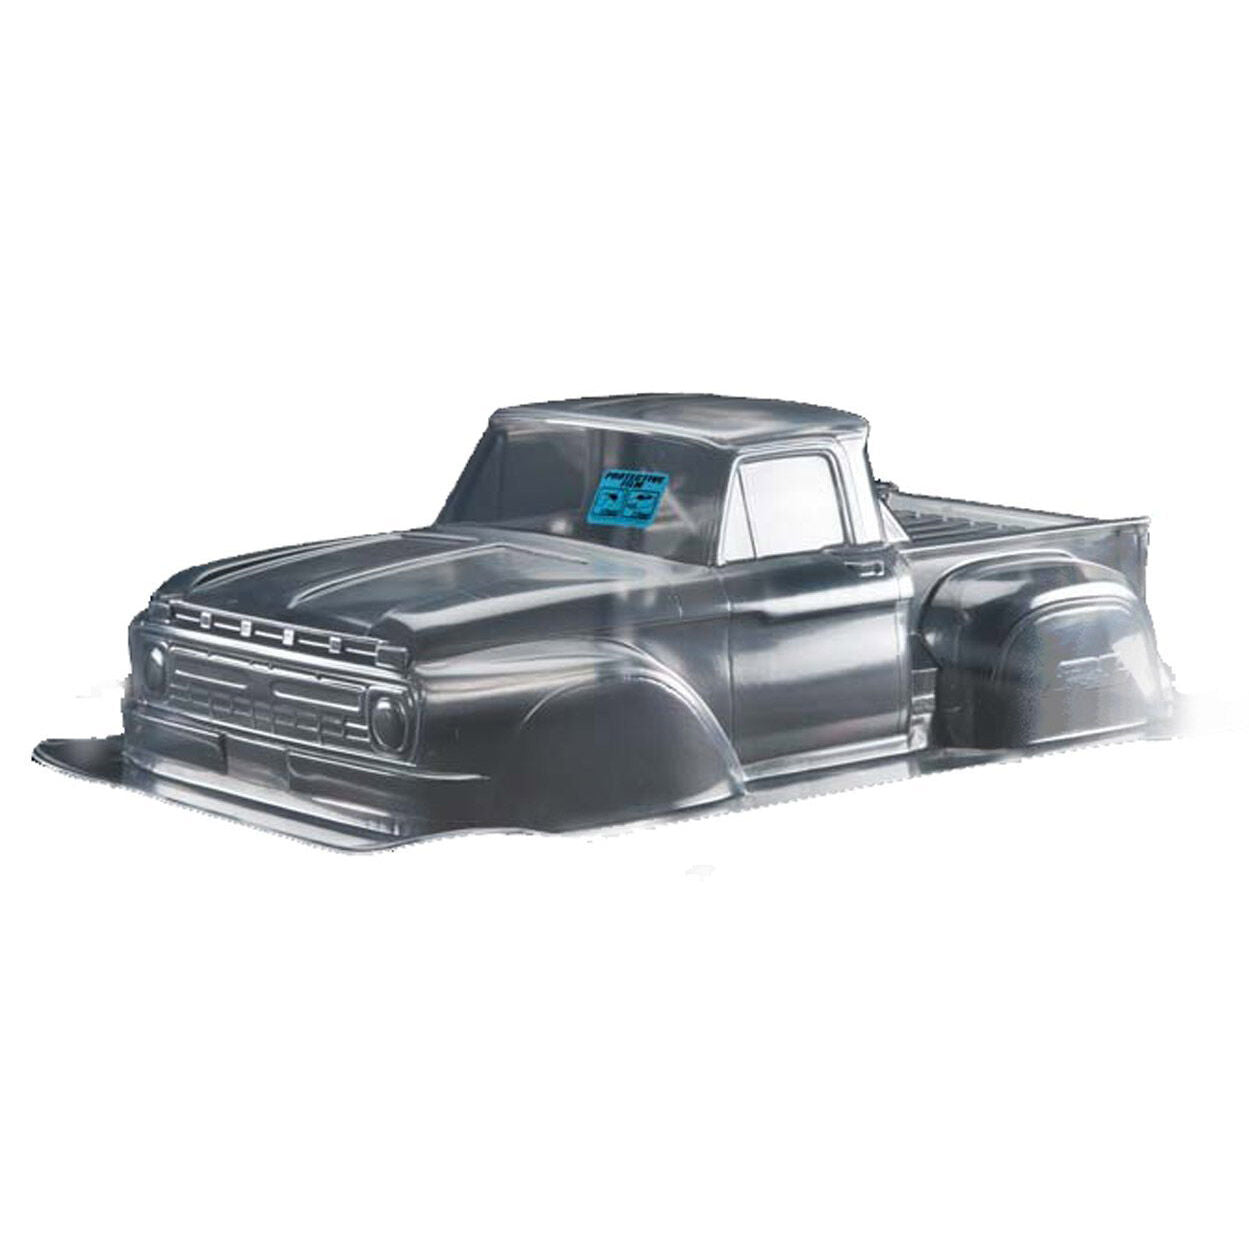 PRO340800 1/10 1966 Ford F-100 Clear Body: Short Course